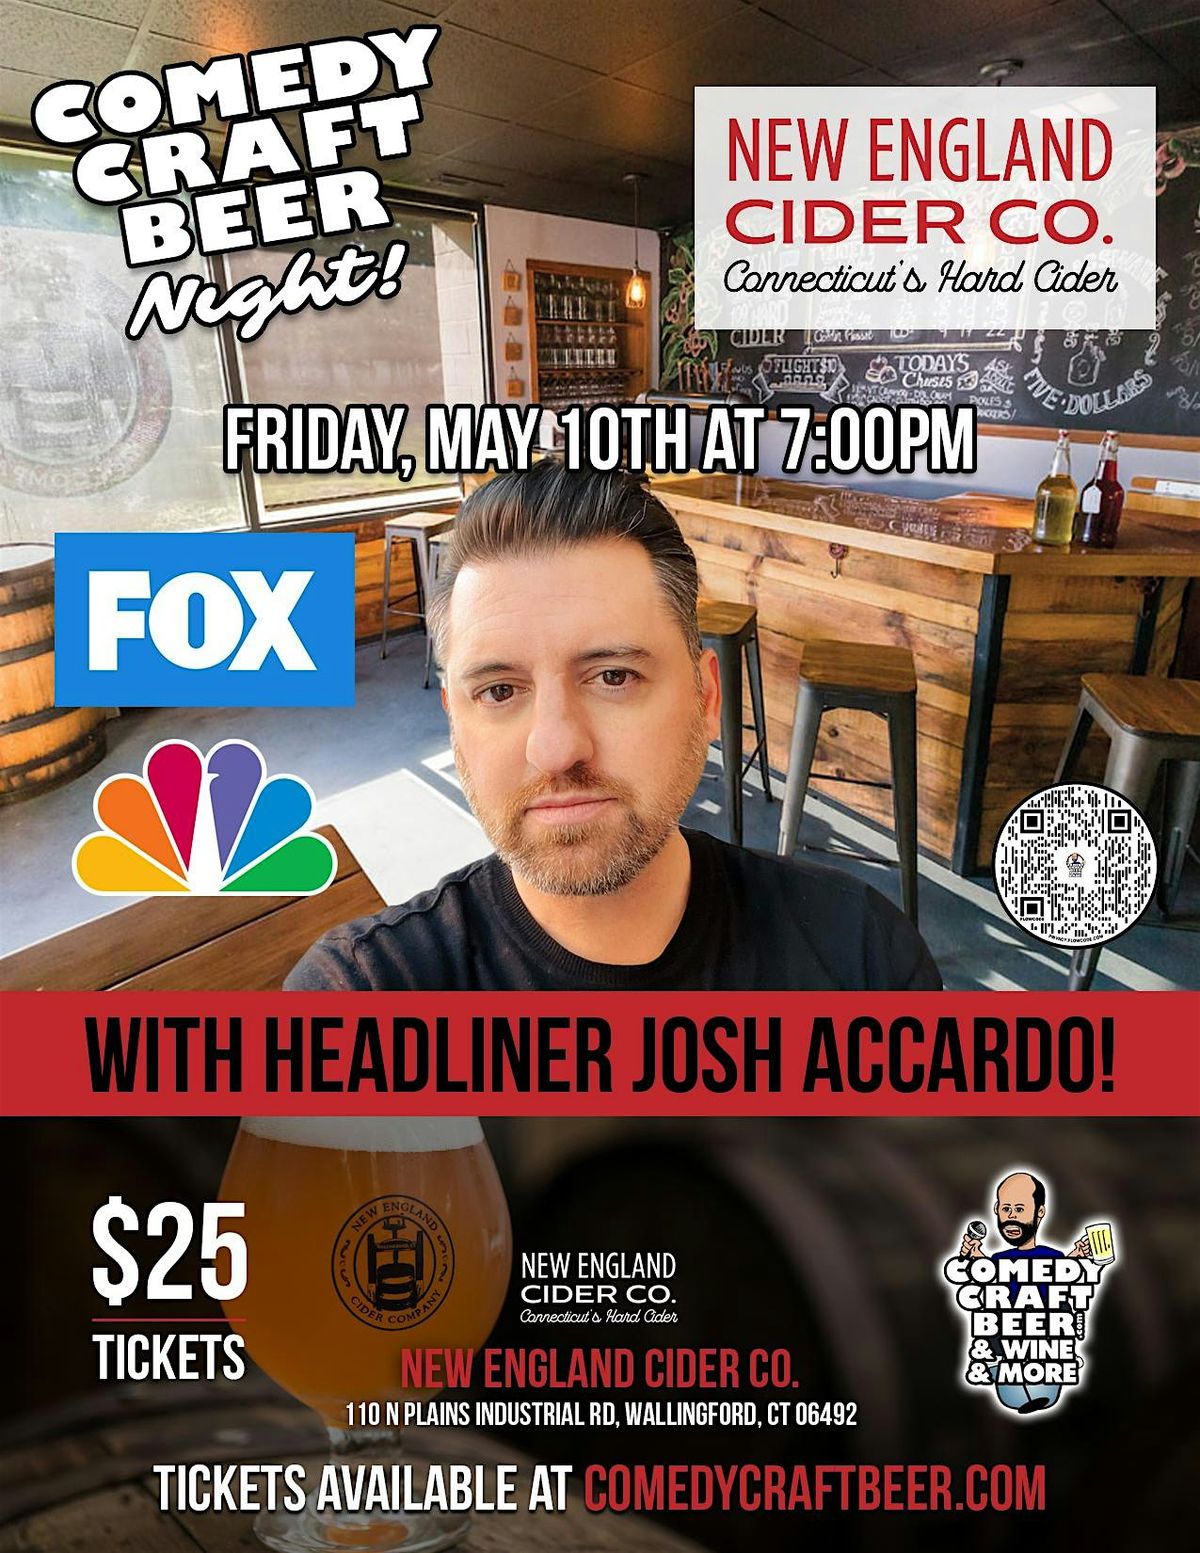 Comedy Night at New England Cider Co.